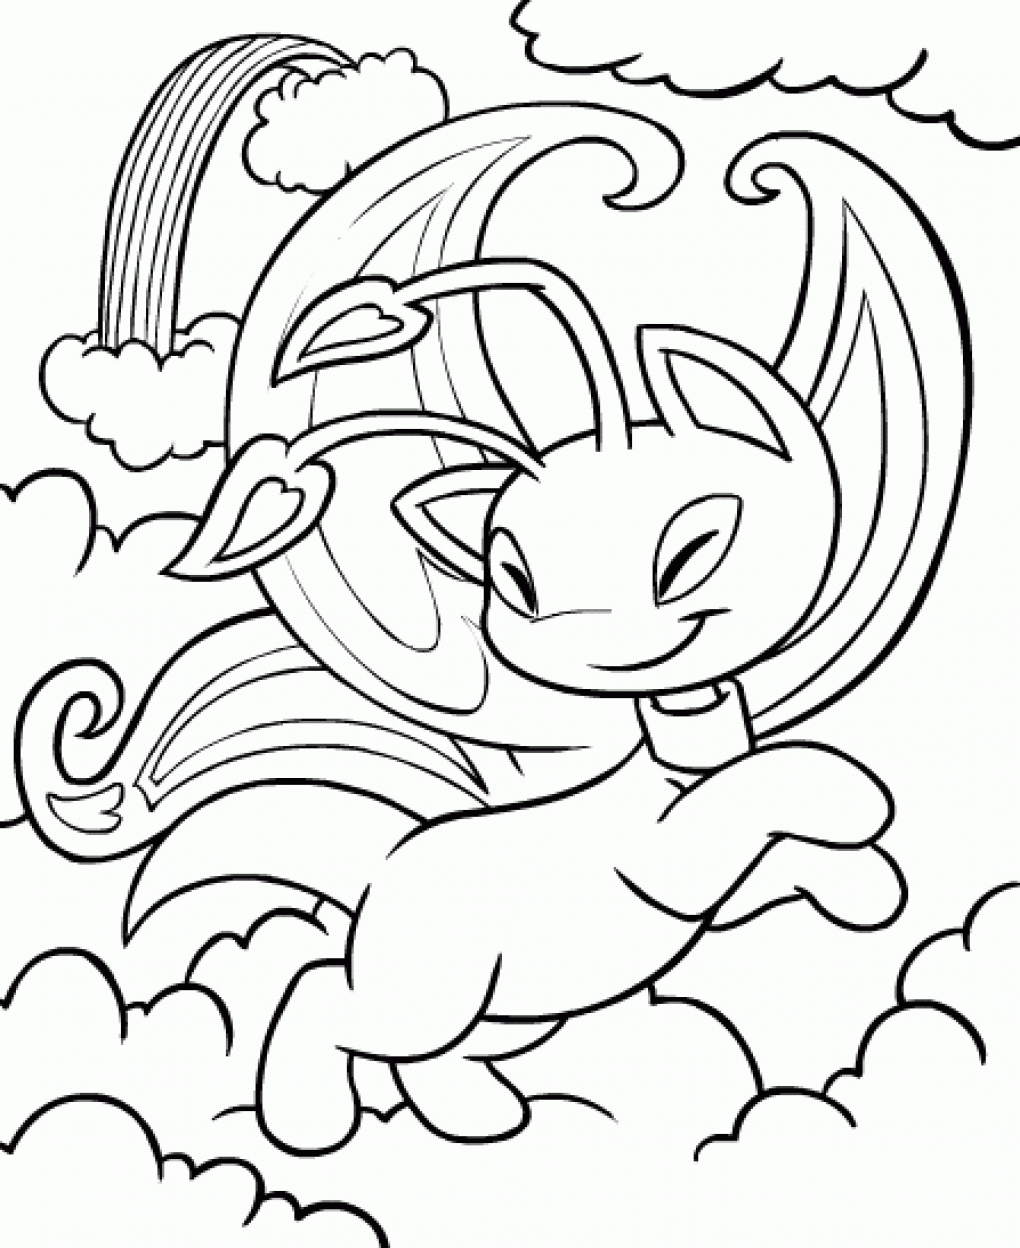 Neopets Coloring Pages 2